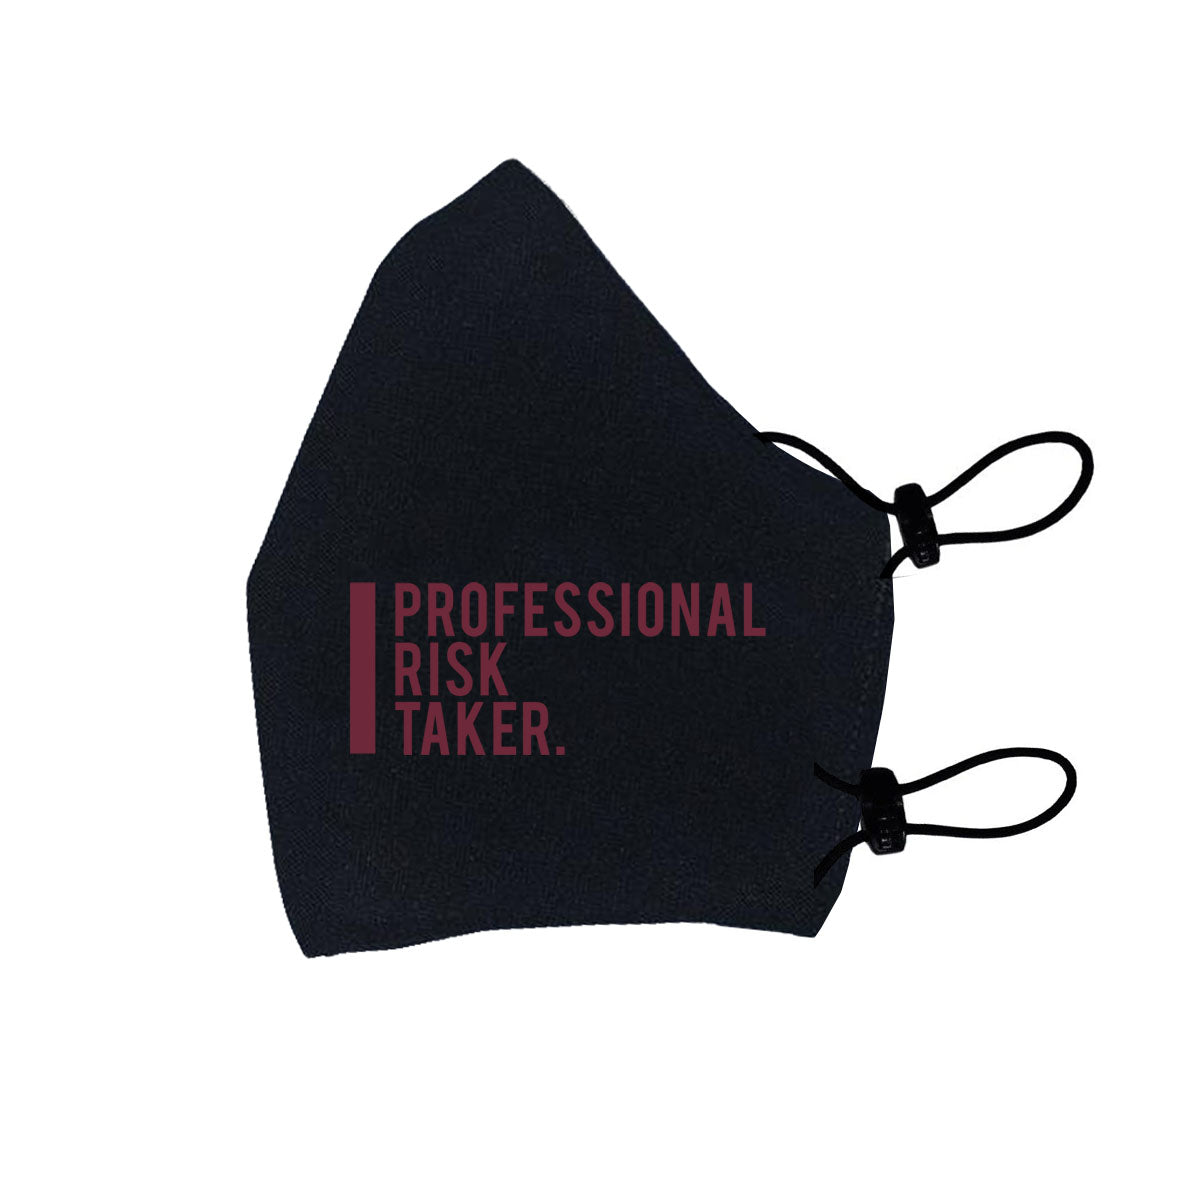 Project BOSS' "Professional RIsk Taker" Adjustable Mask w/ Nose Clip